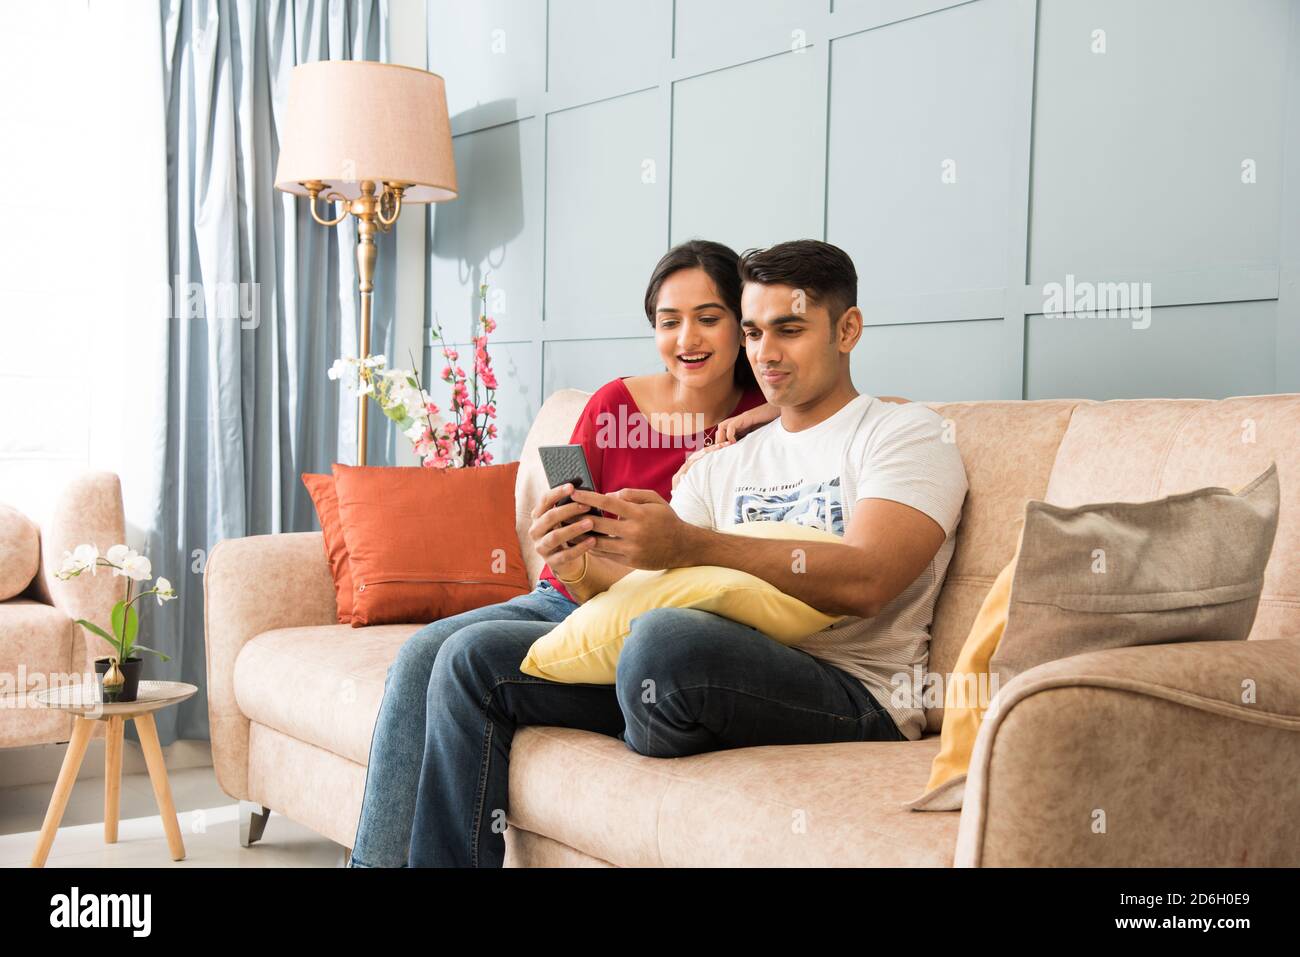 Indian asian young couple using smartphone together while sitting on sofa or couch and modern interior space or home Stock Photo